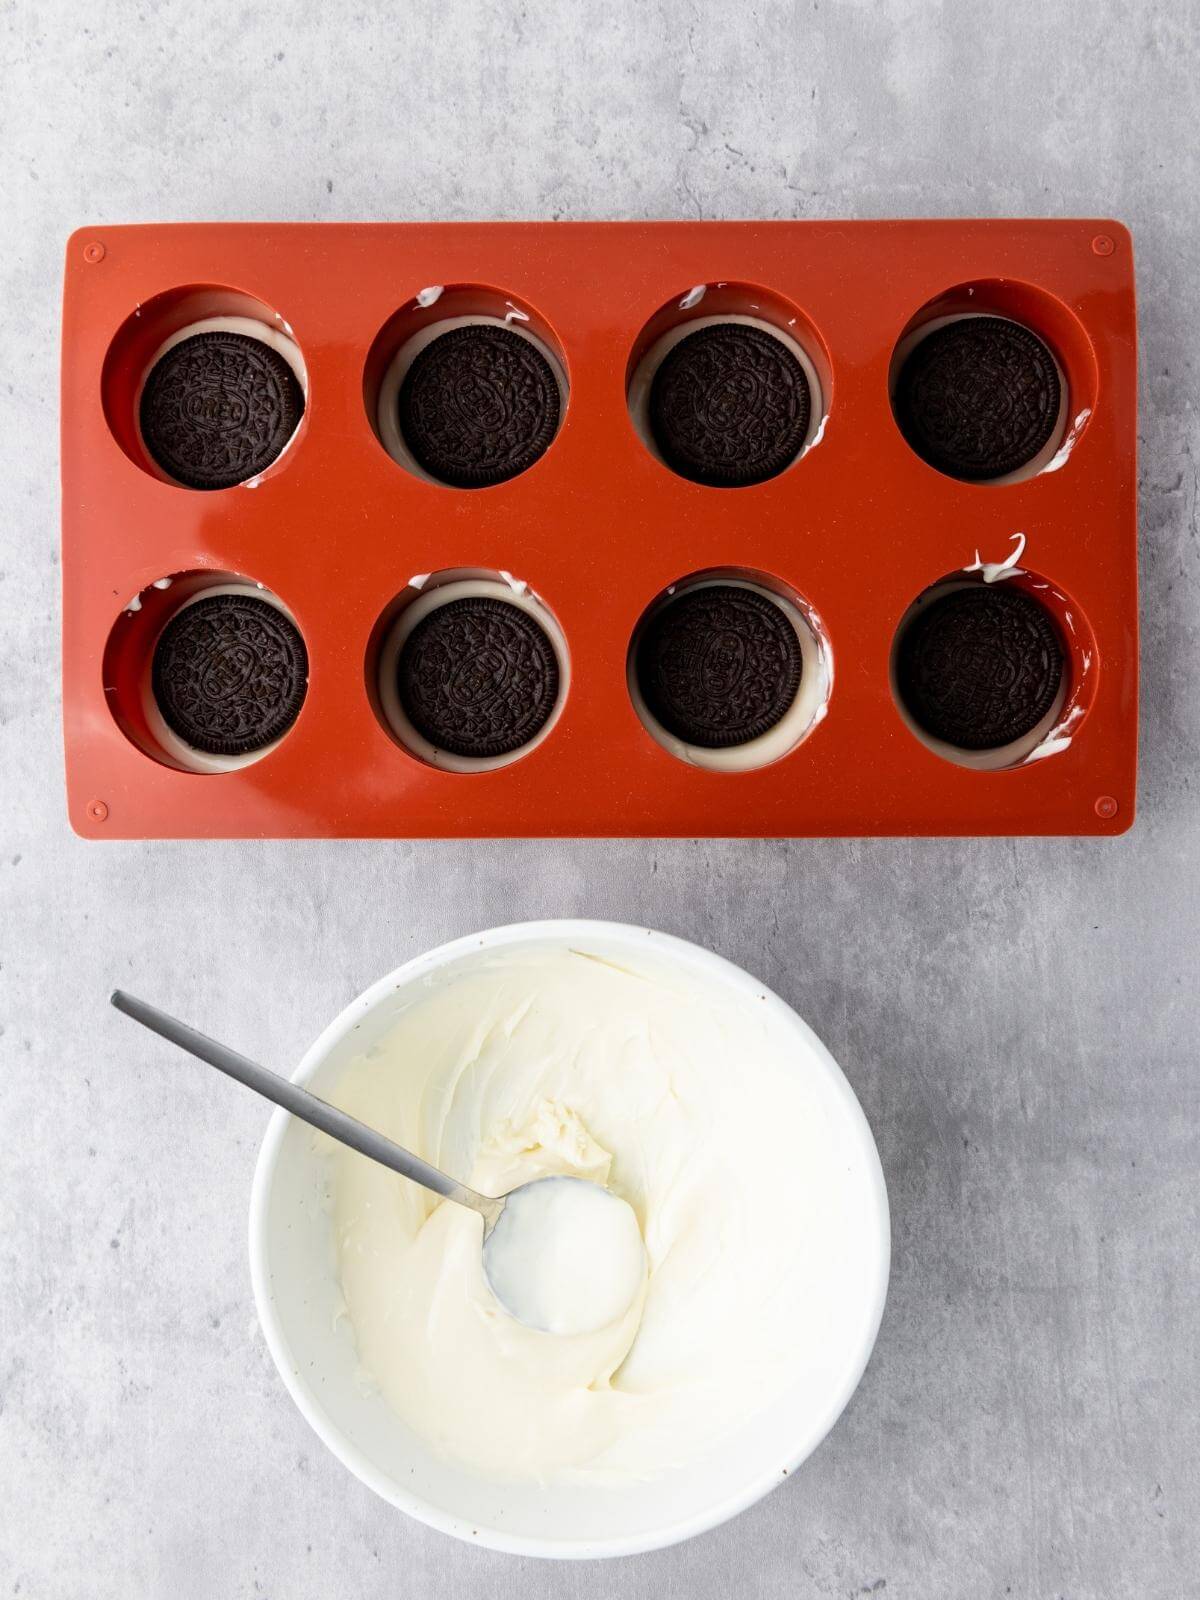 A red cookie mold filled with white chocolate with oreos on top and a bowl with melted white chocolate in it.